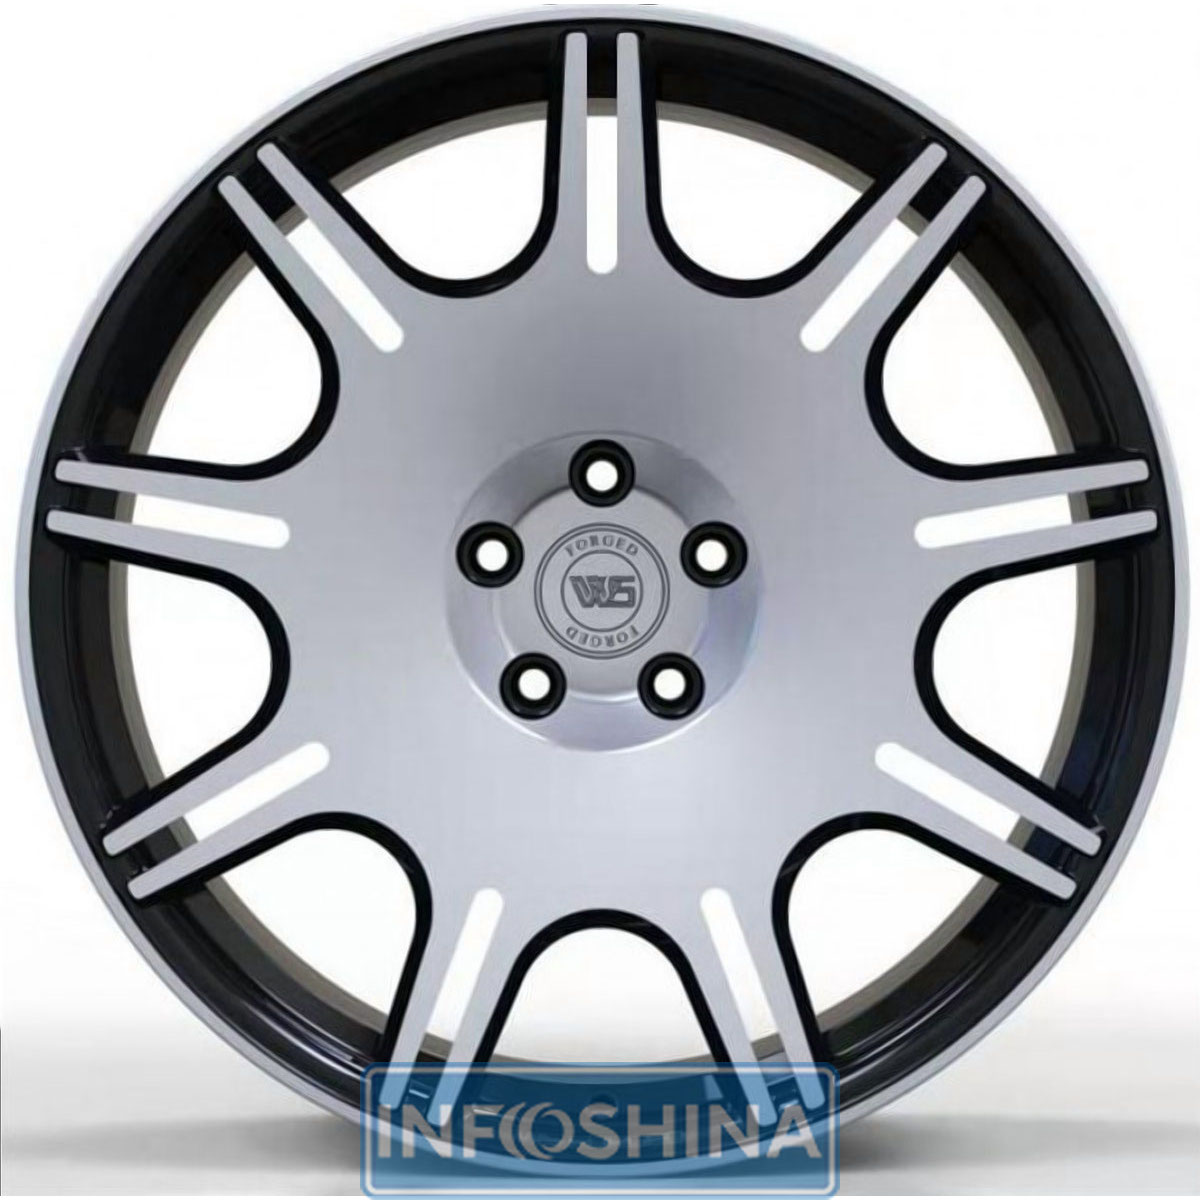 Купить диски WS Forged WS1249 Gloss Black With Machined Face R20 W10 PCD5x112 ET35 DIA66.6